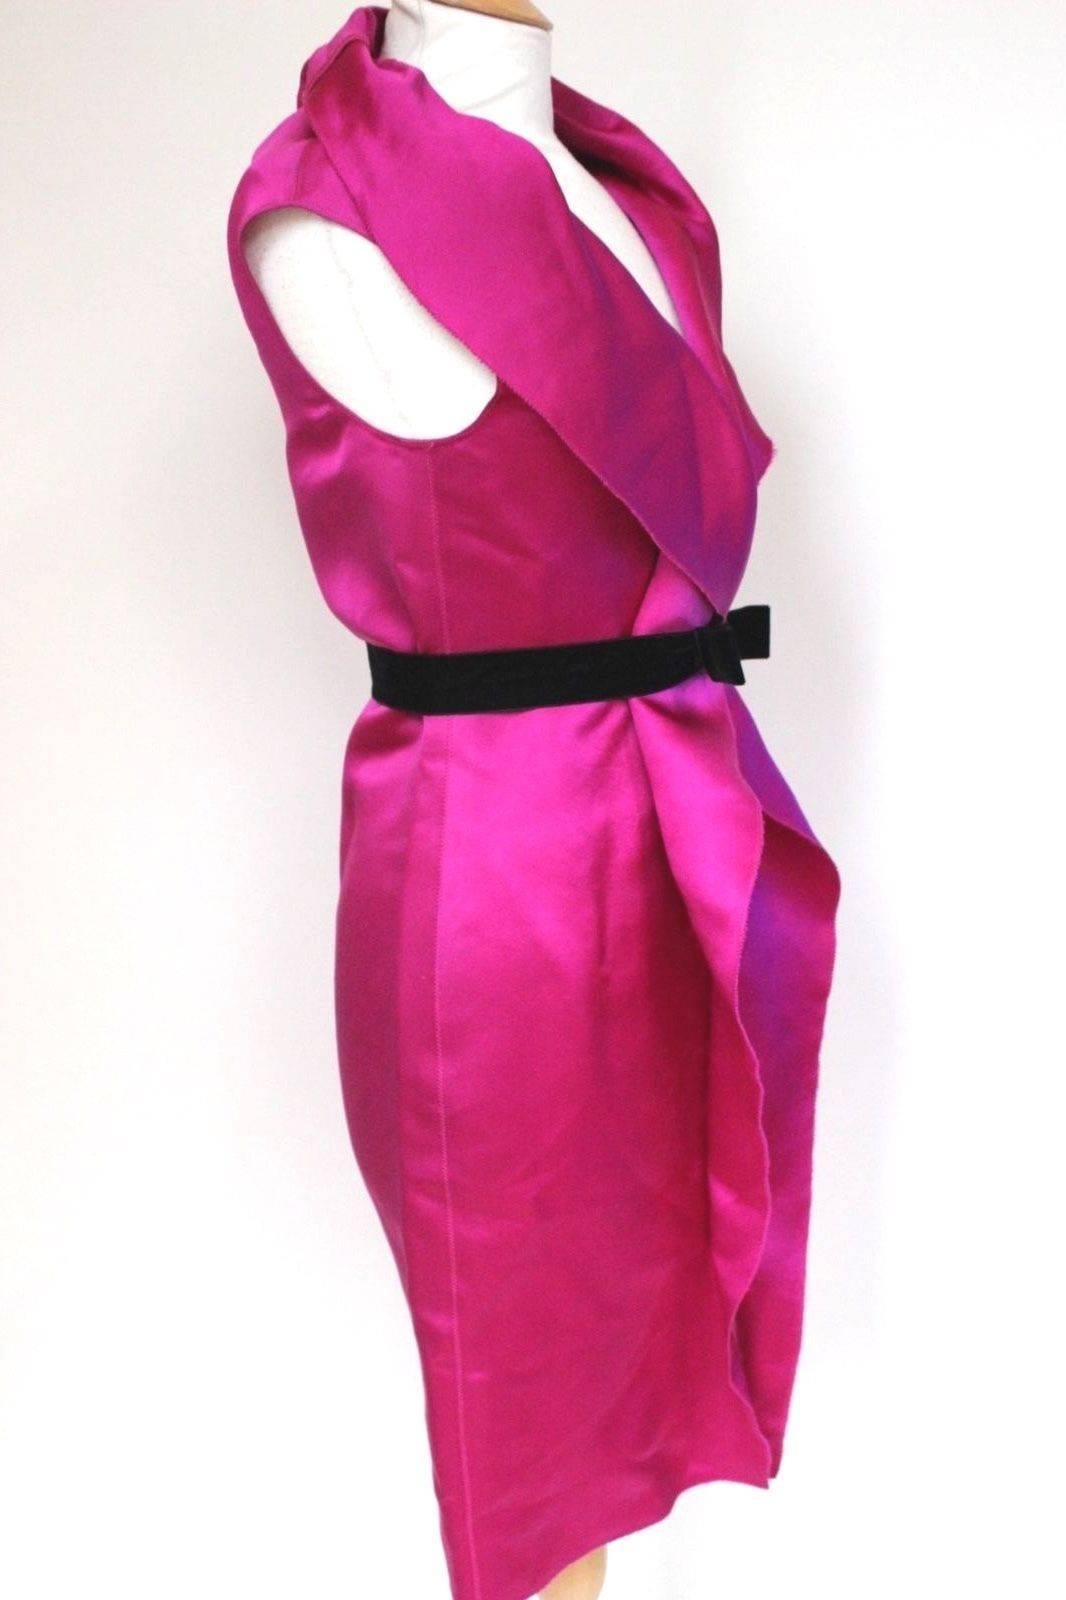 New £2235 Lanvin Alber Elbaz 10 year anniversary black shift Dress 38 uk 10 
Show stopping fuchsia pink dress, featuring two large ruffles to the front 
The neck line can be changed to suit your style 
Velvet belt to the waist, zip fastening to